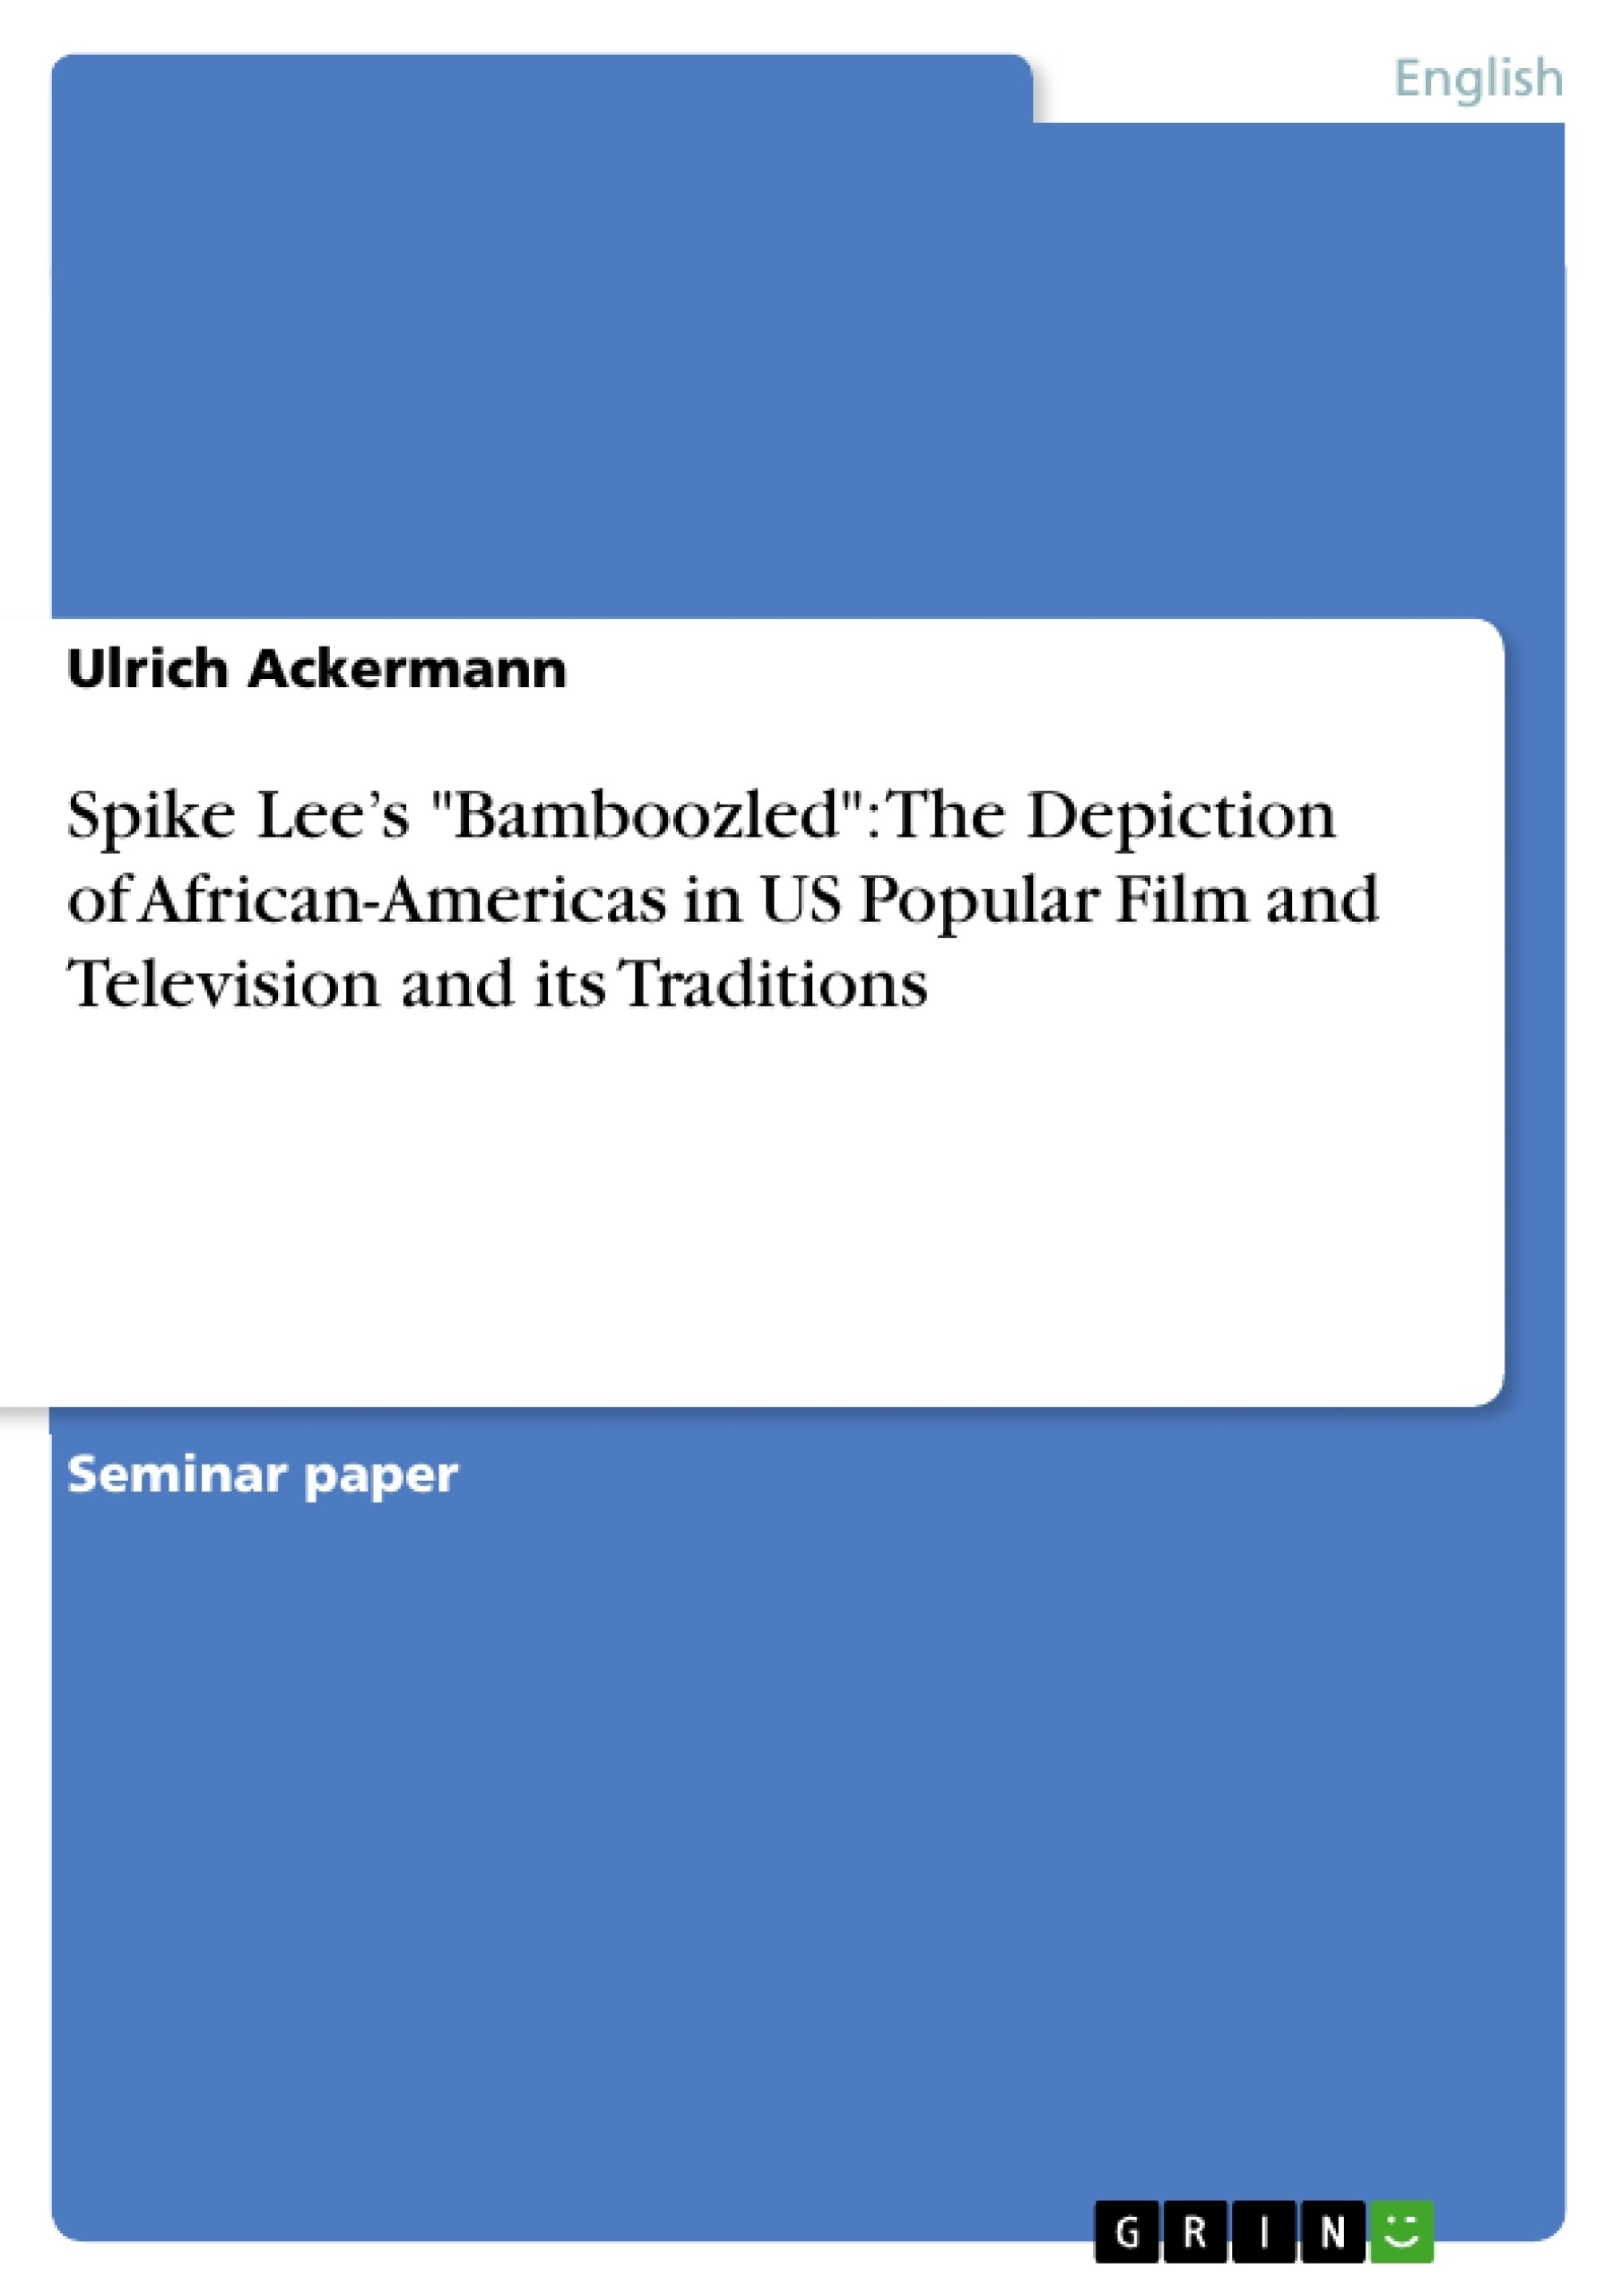 Titre: Spike Lee’s "Bamboozled": The Depiction of African-Americas in US Popular Film and Television and its Traditions